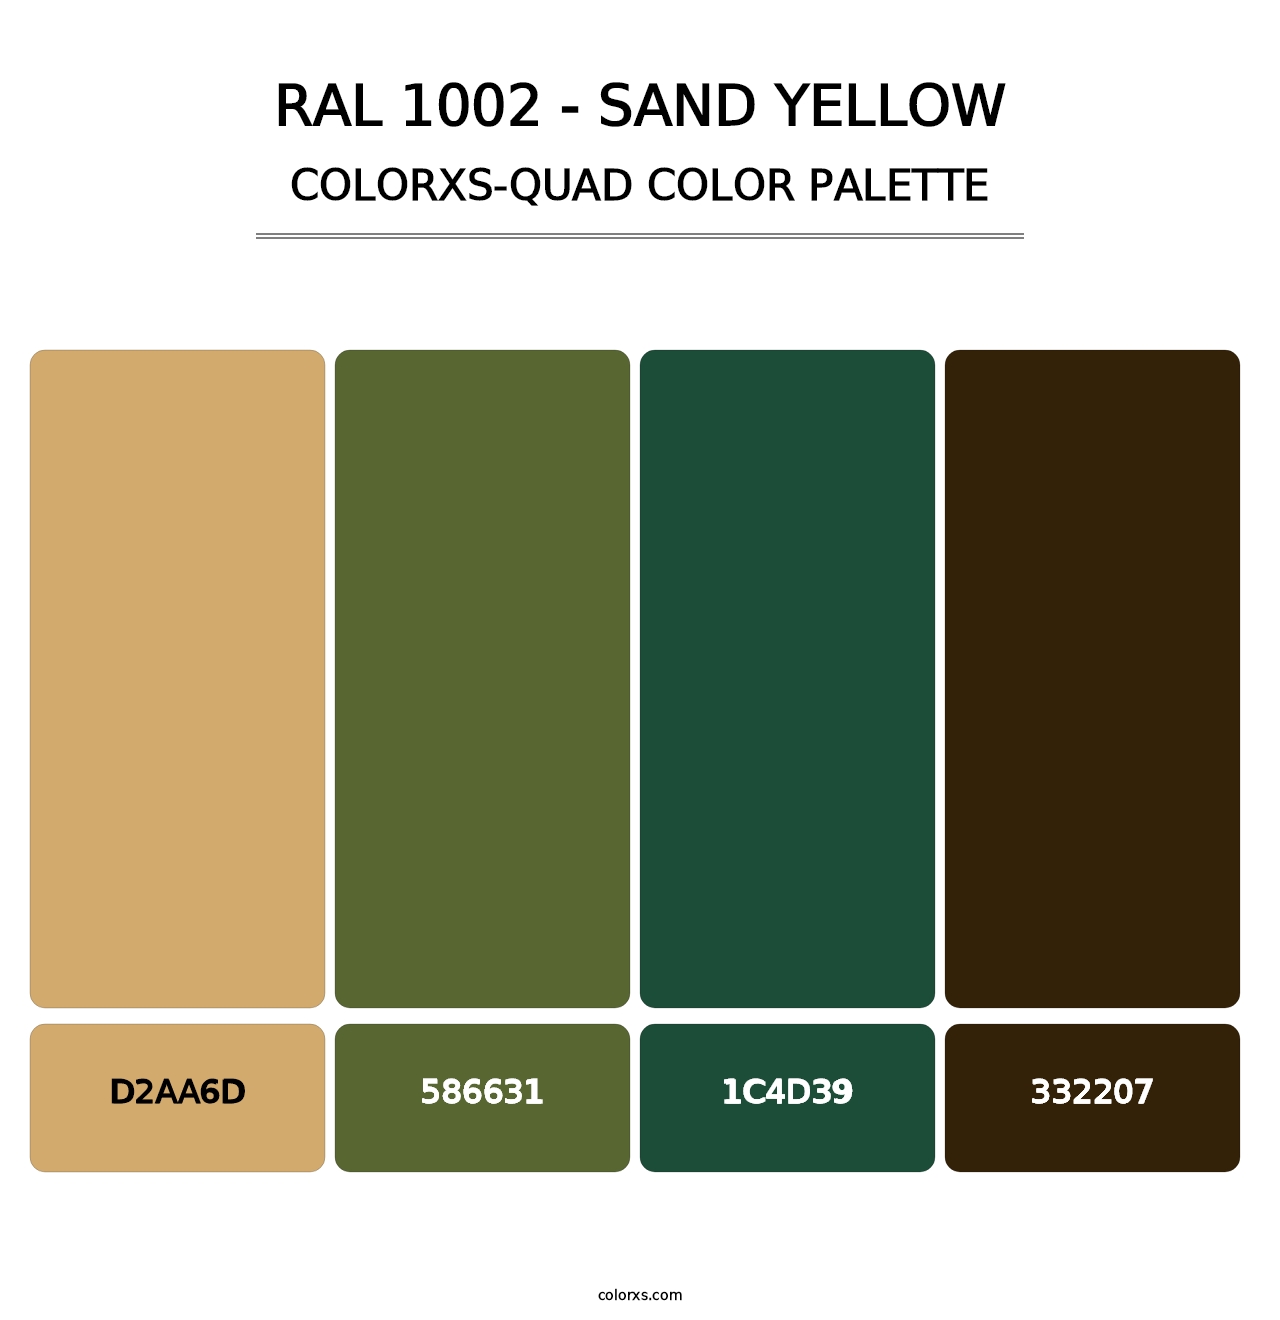 RAL 1002 - Sand Yellow - Colorxs Quad Palette